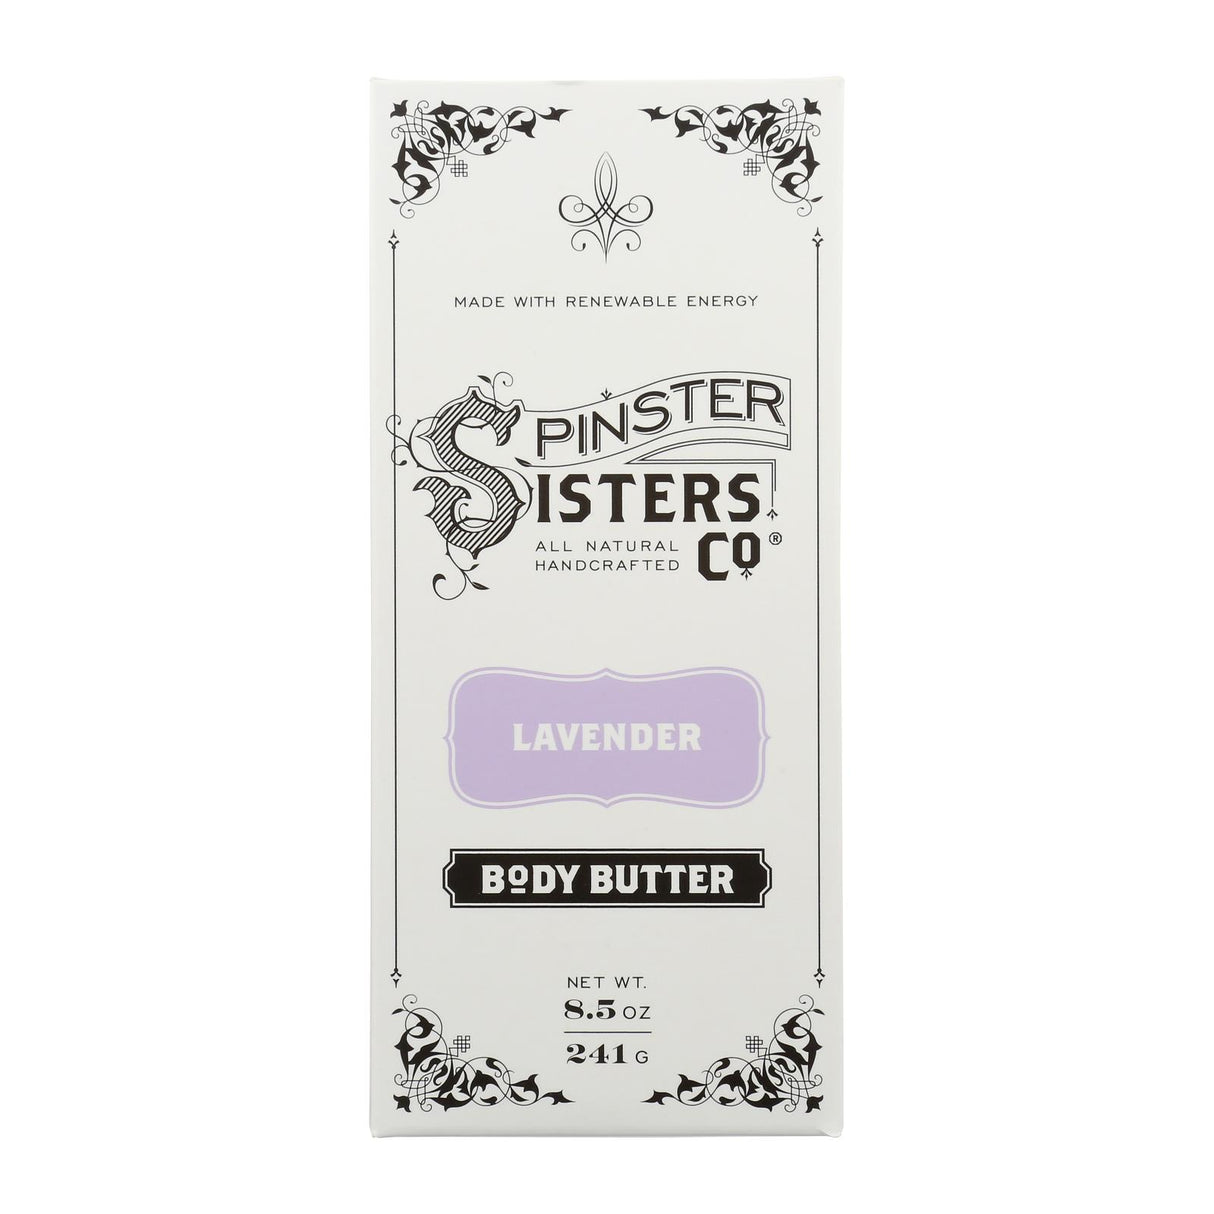 Spinster Sisters Co. Lavender Body Butter - Case Of 4 - 8.5 Oz - Cozy Farm 